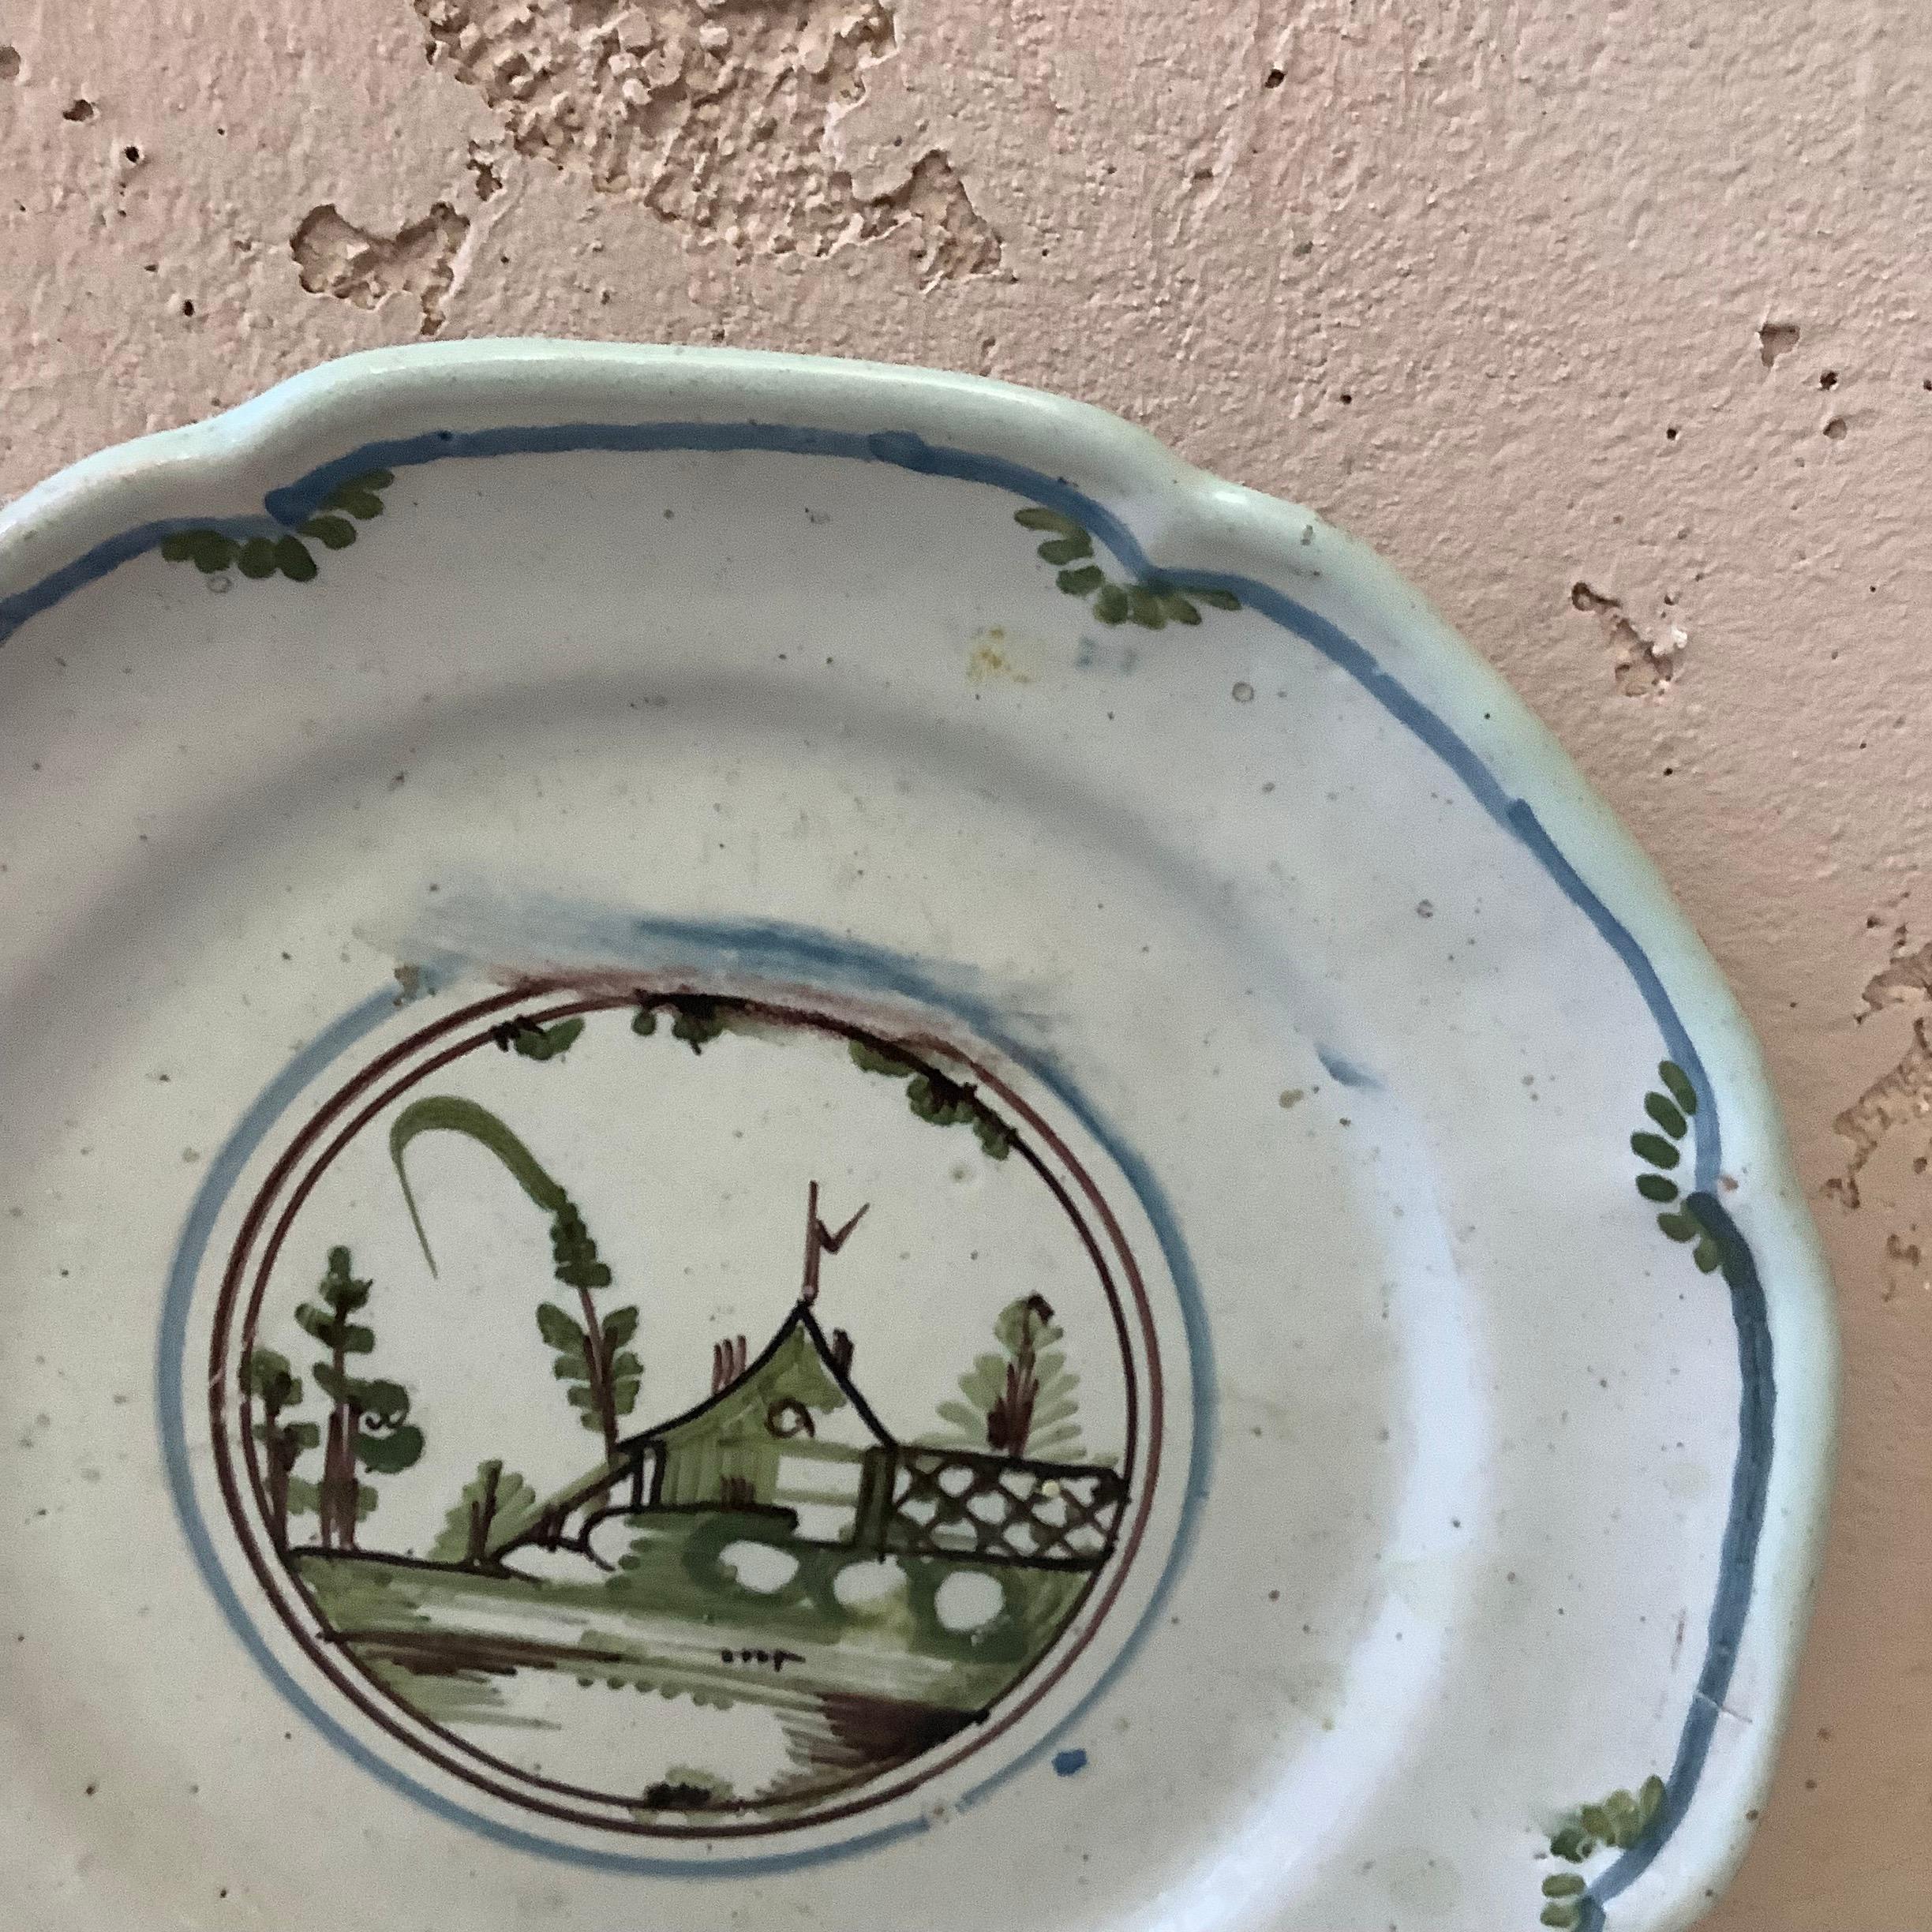 18th century French faience Nevers plate.
House with trees on the center.